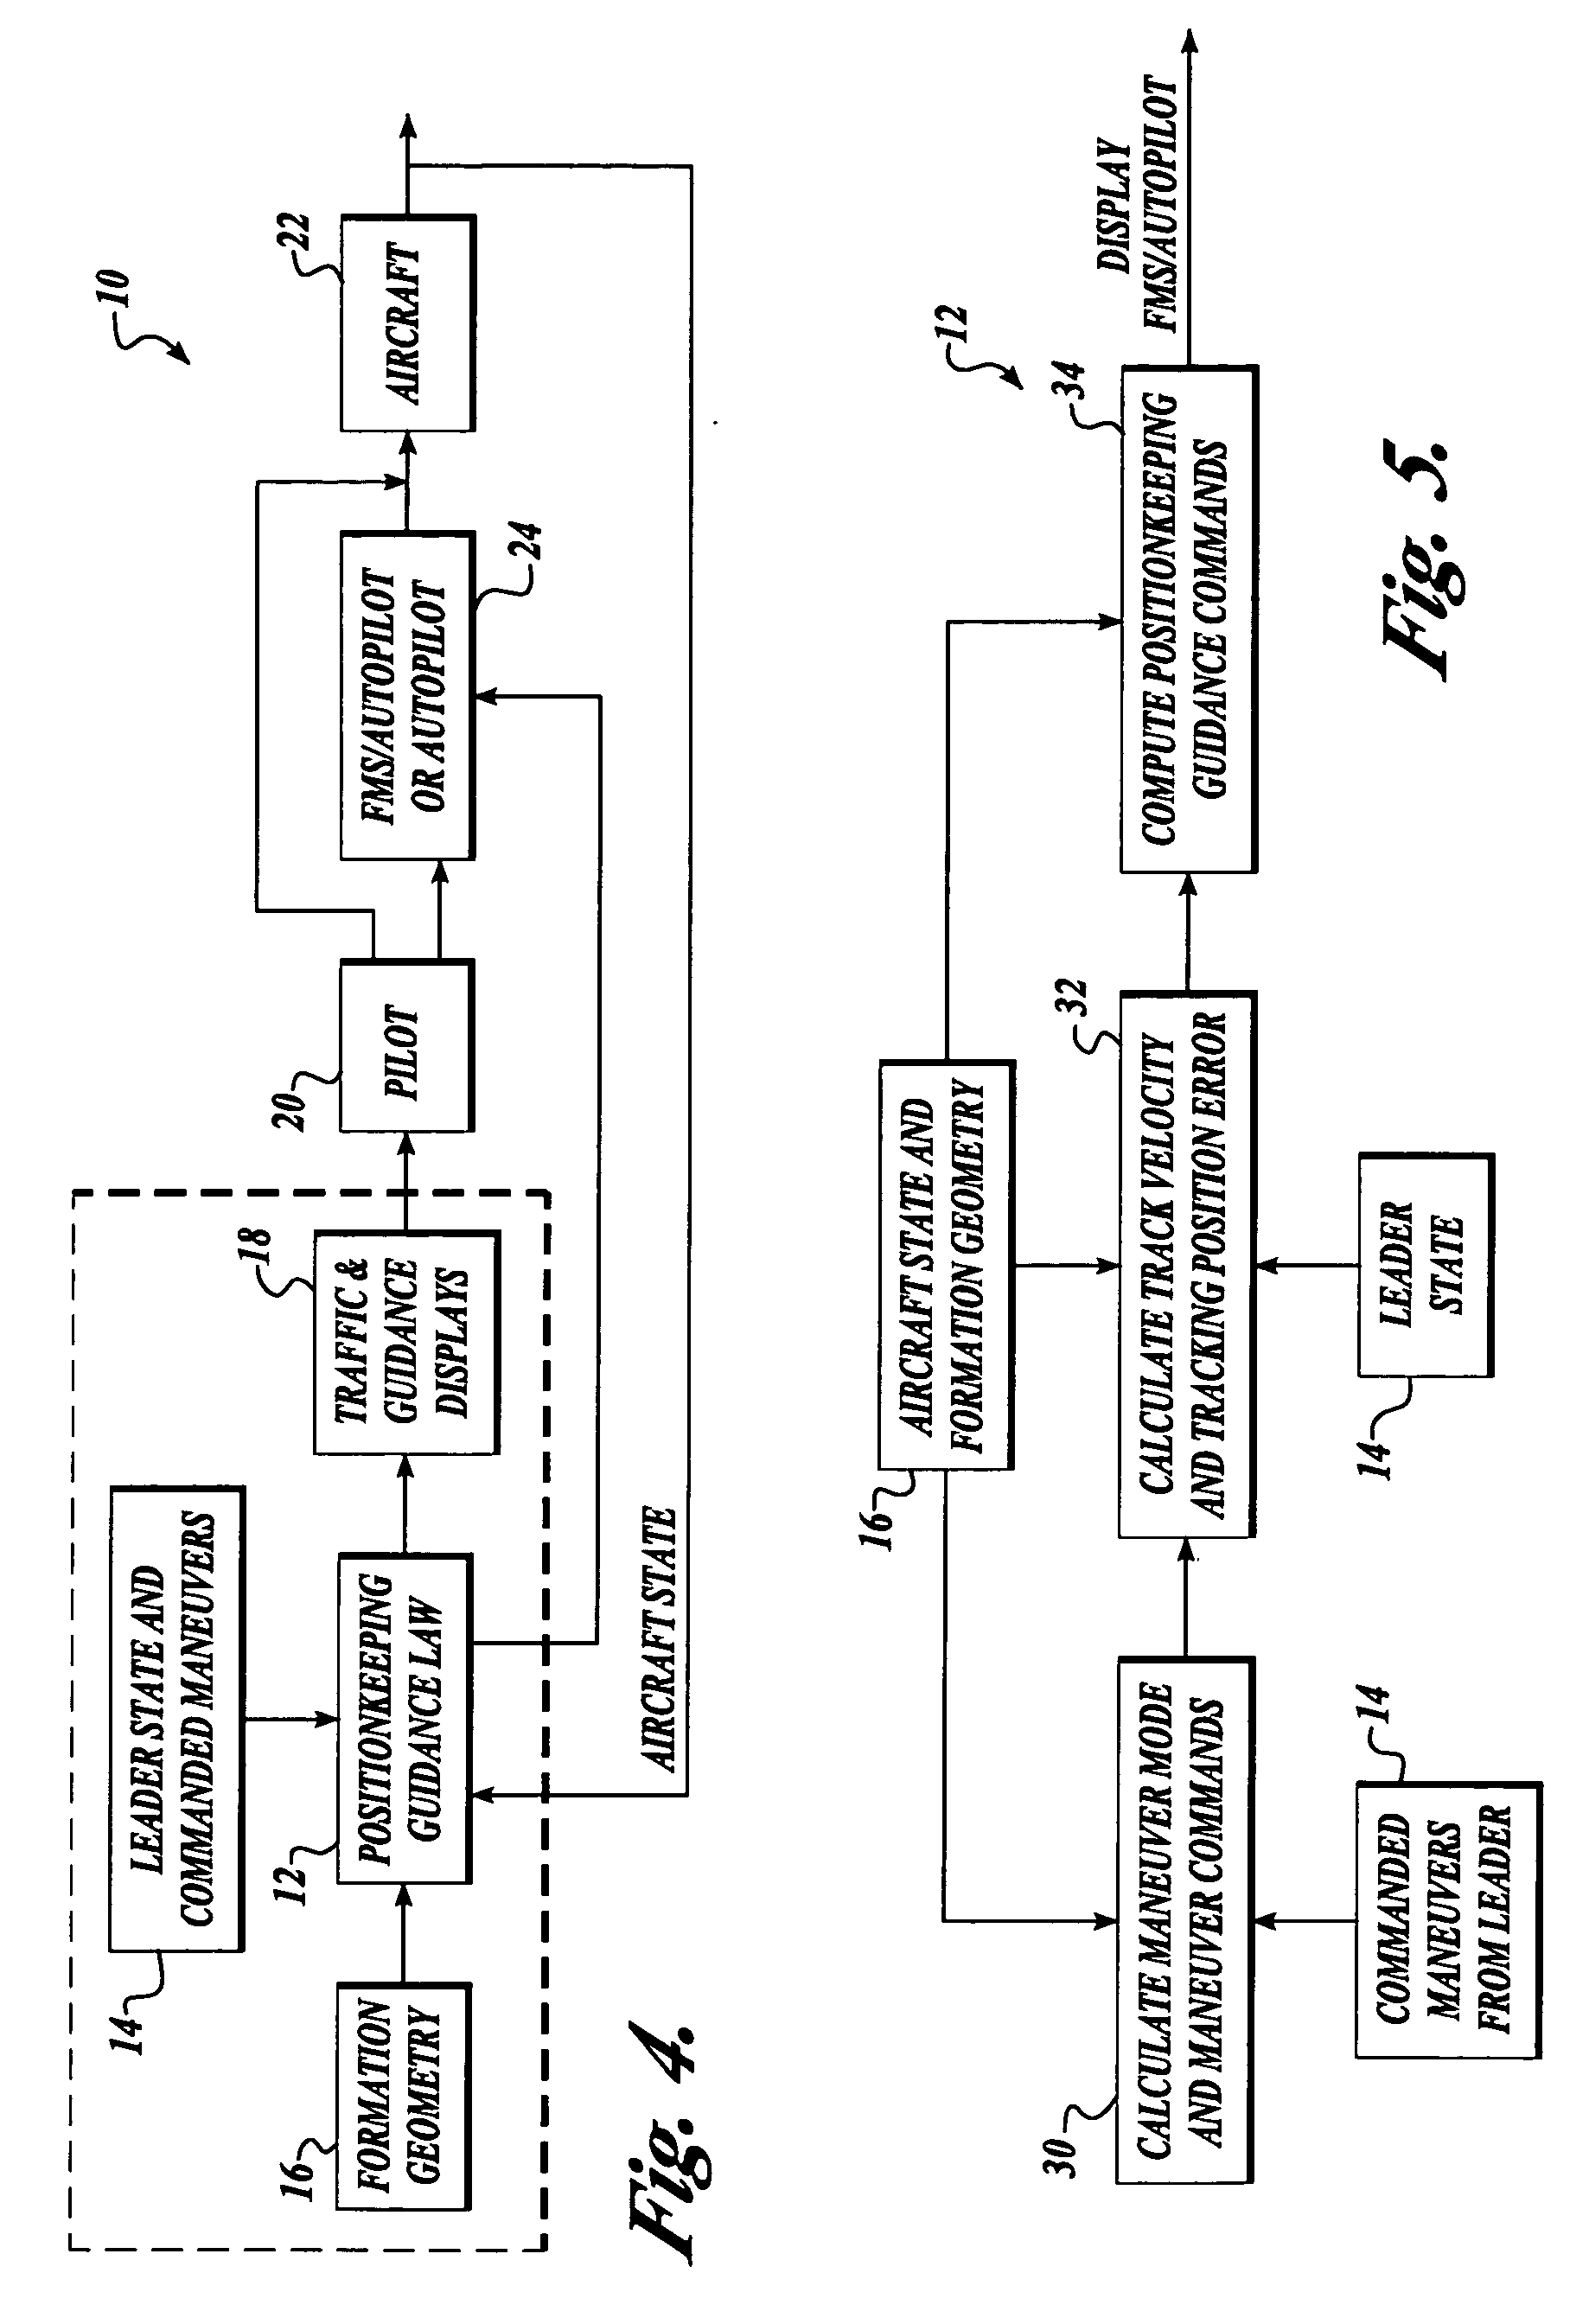 Vehicle position keeping system